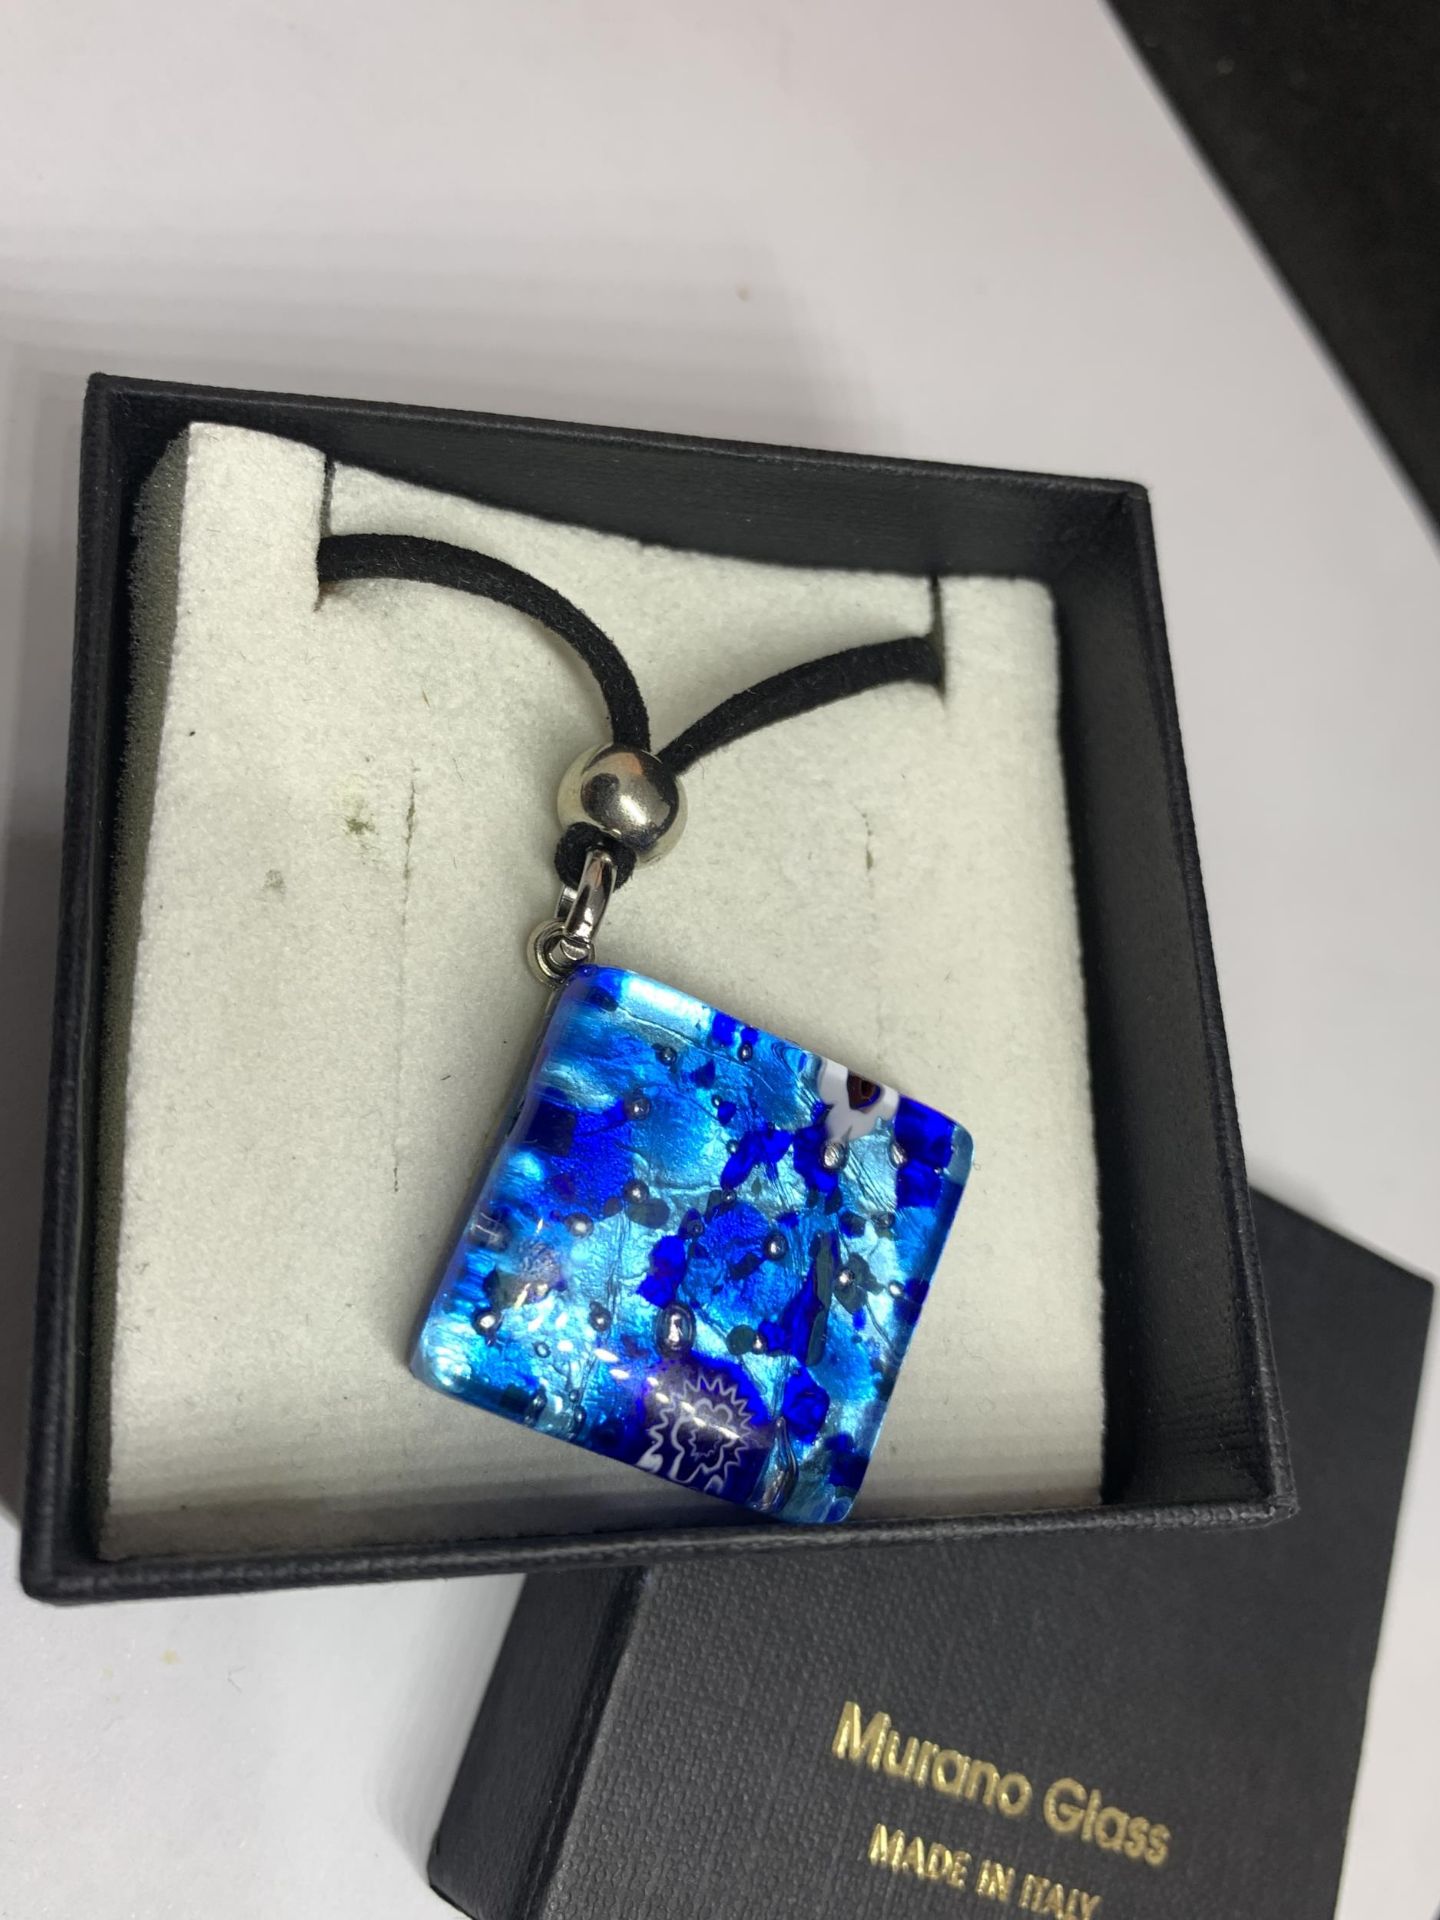 A MURANO GLASS NECKLACE IN A PRESENTATION BOX - Image 2 of 3